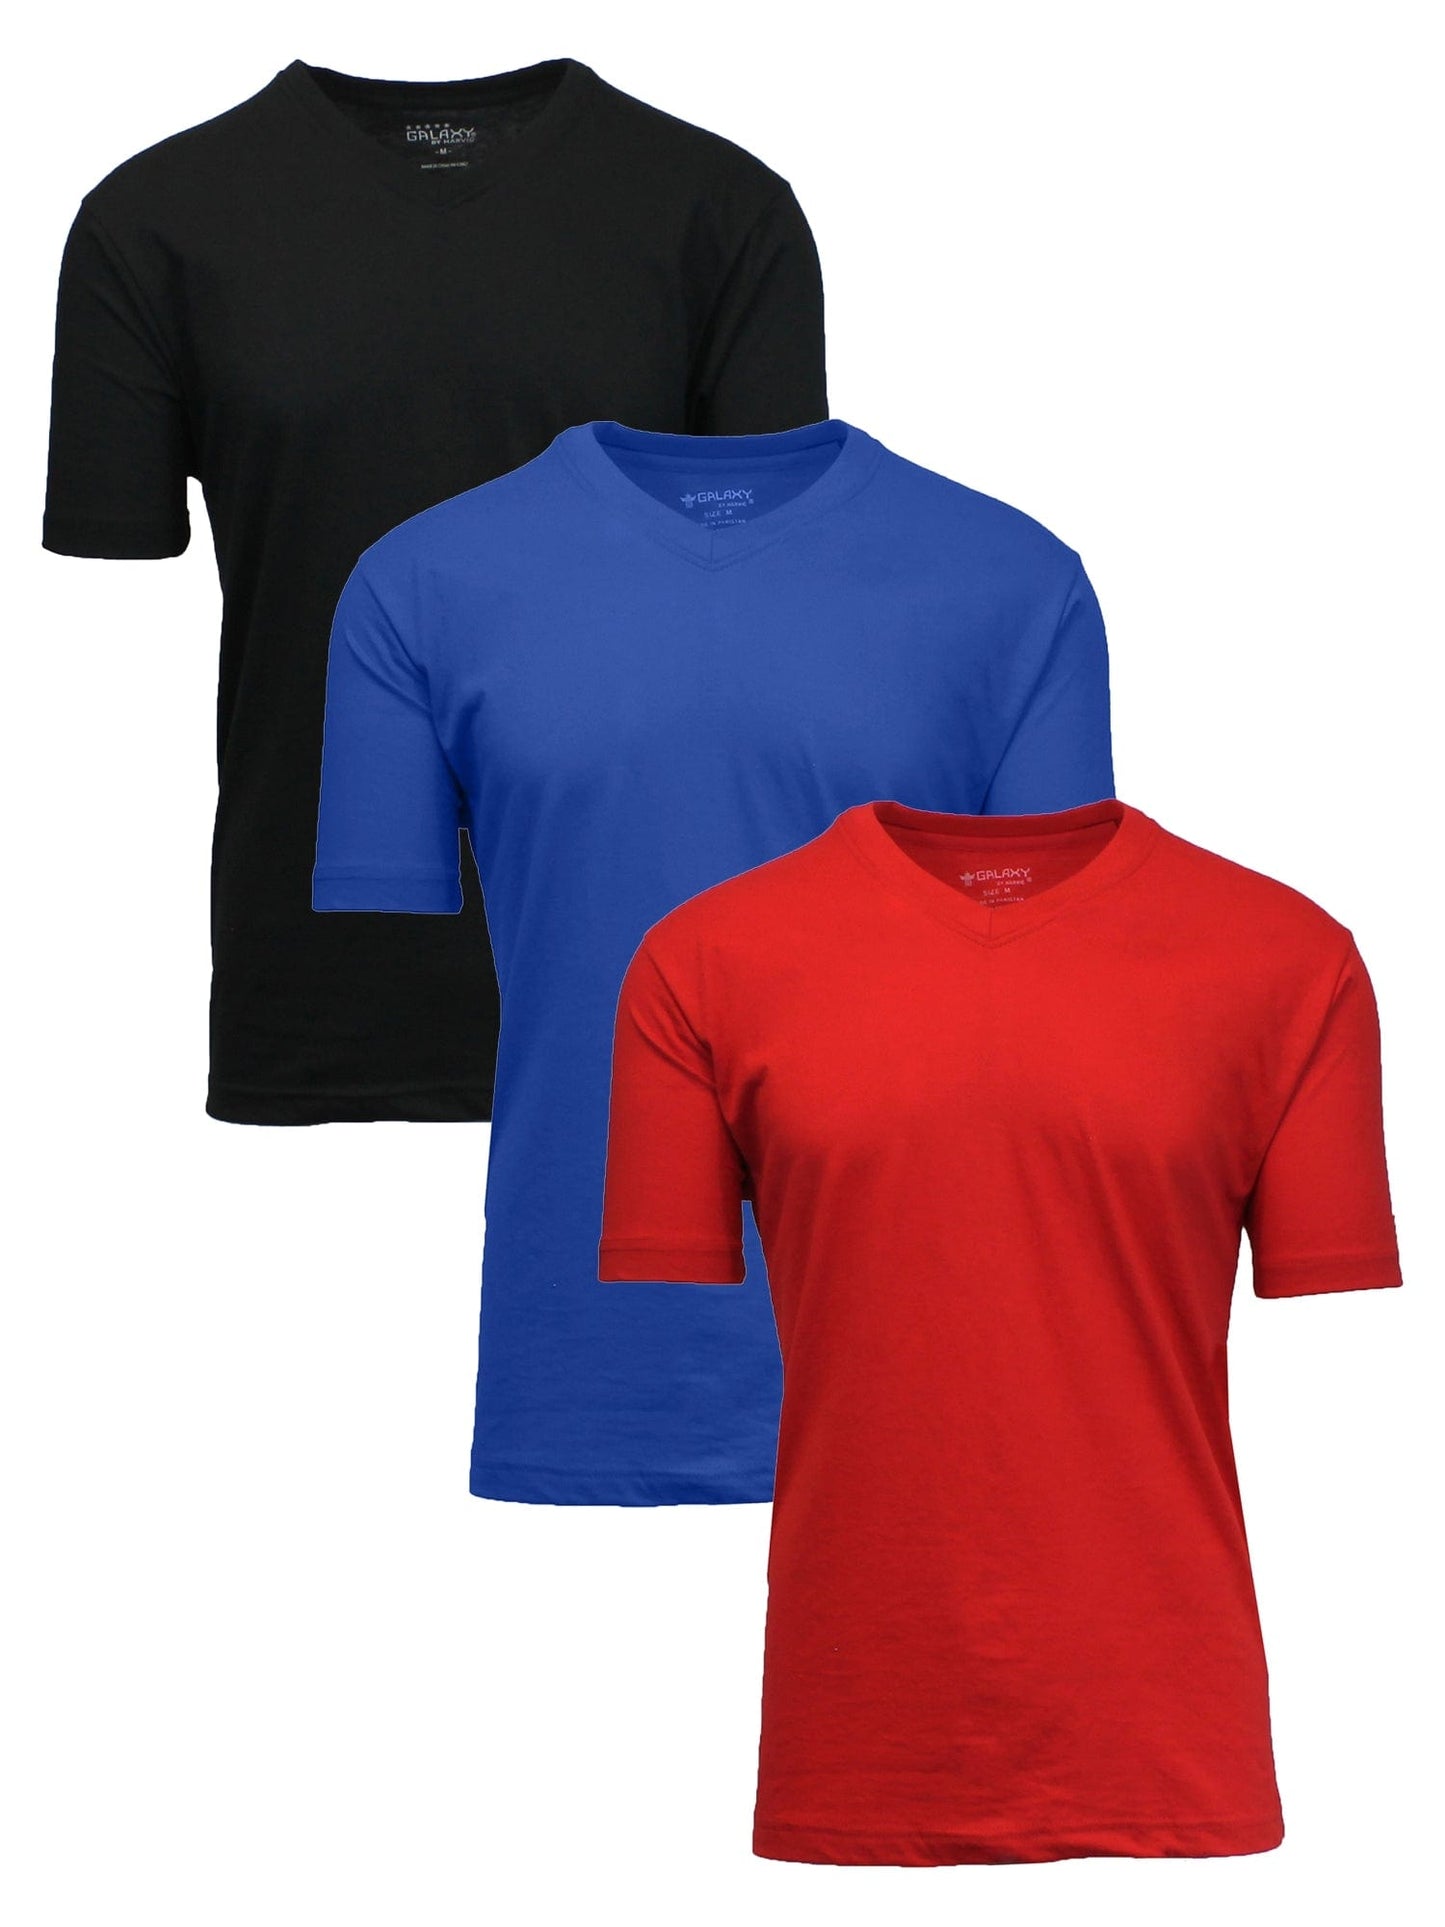 Men's (3-Pack) Short Sleeve V-Neck Modern Fit Classic Tees (S-3XL) - GalaxybyHarvic